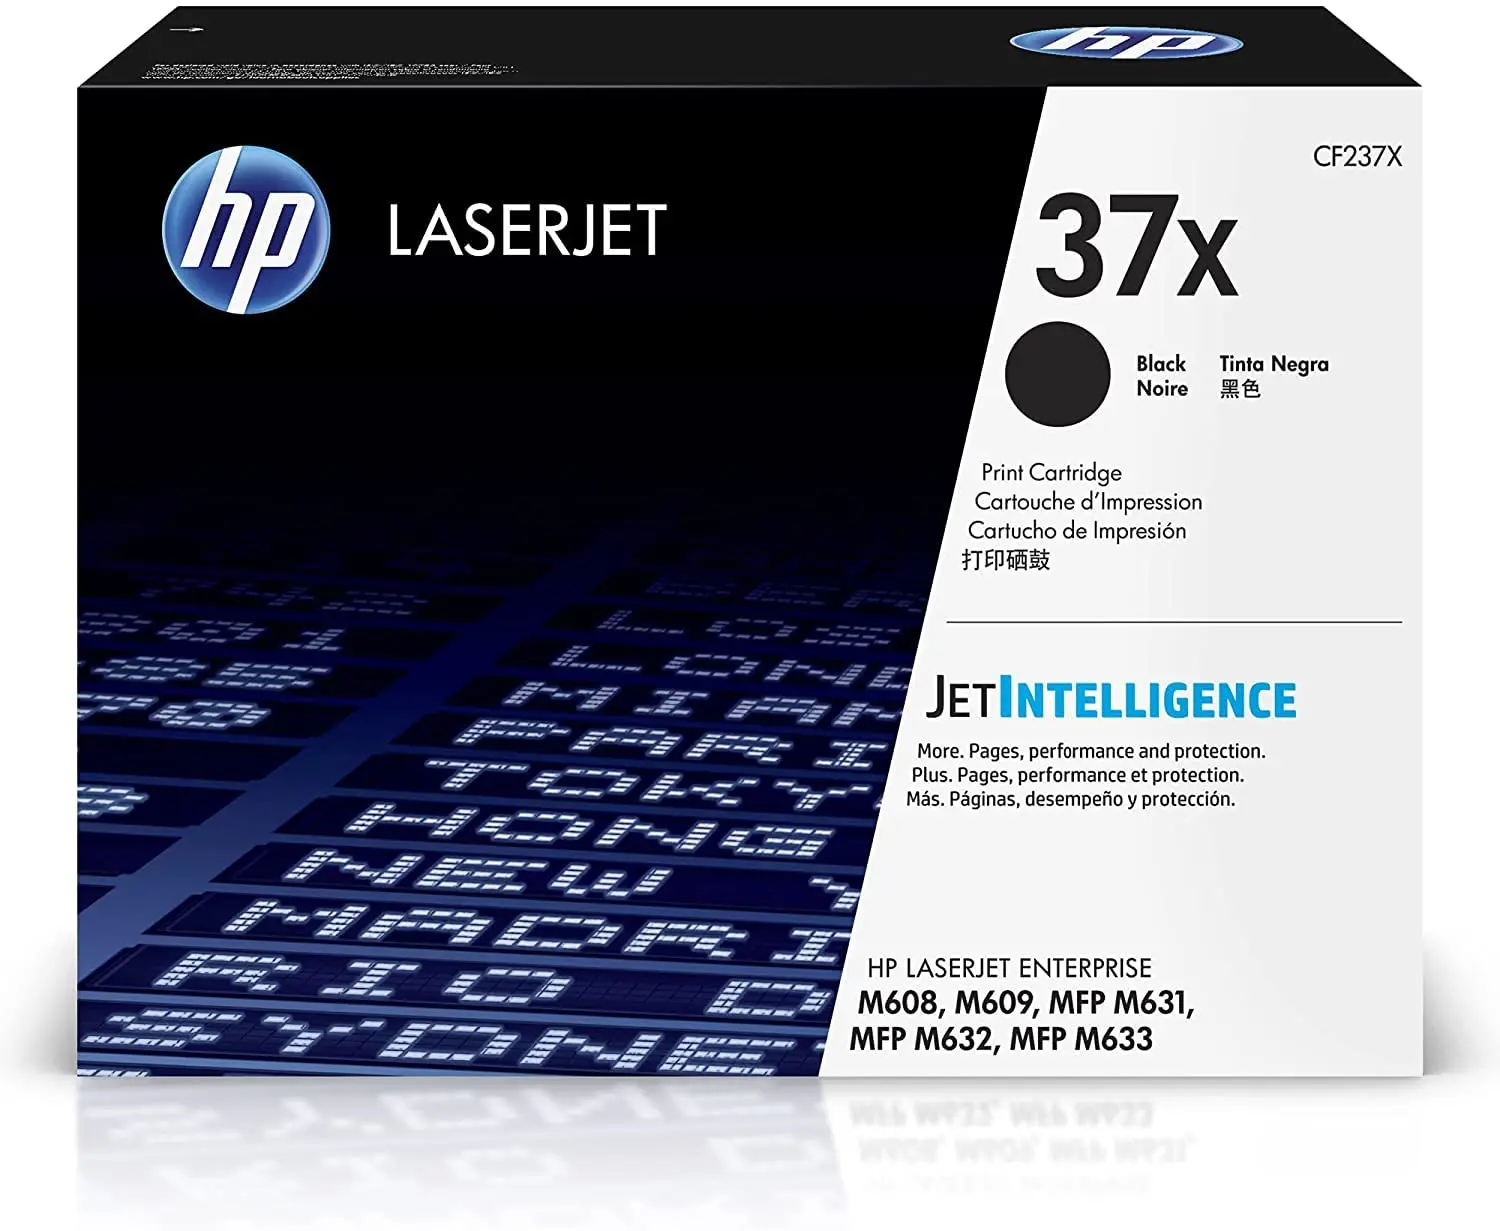 hewlett packard m608 count - What is the product number for HP m608